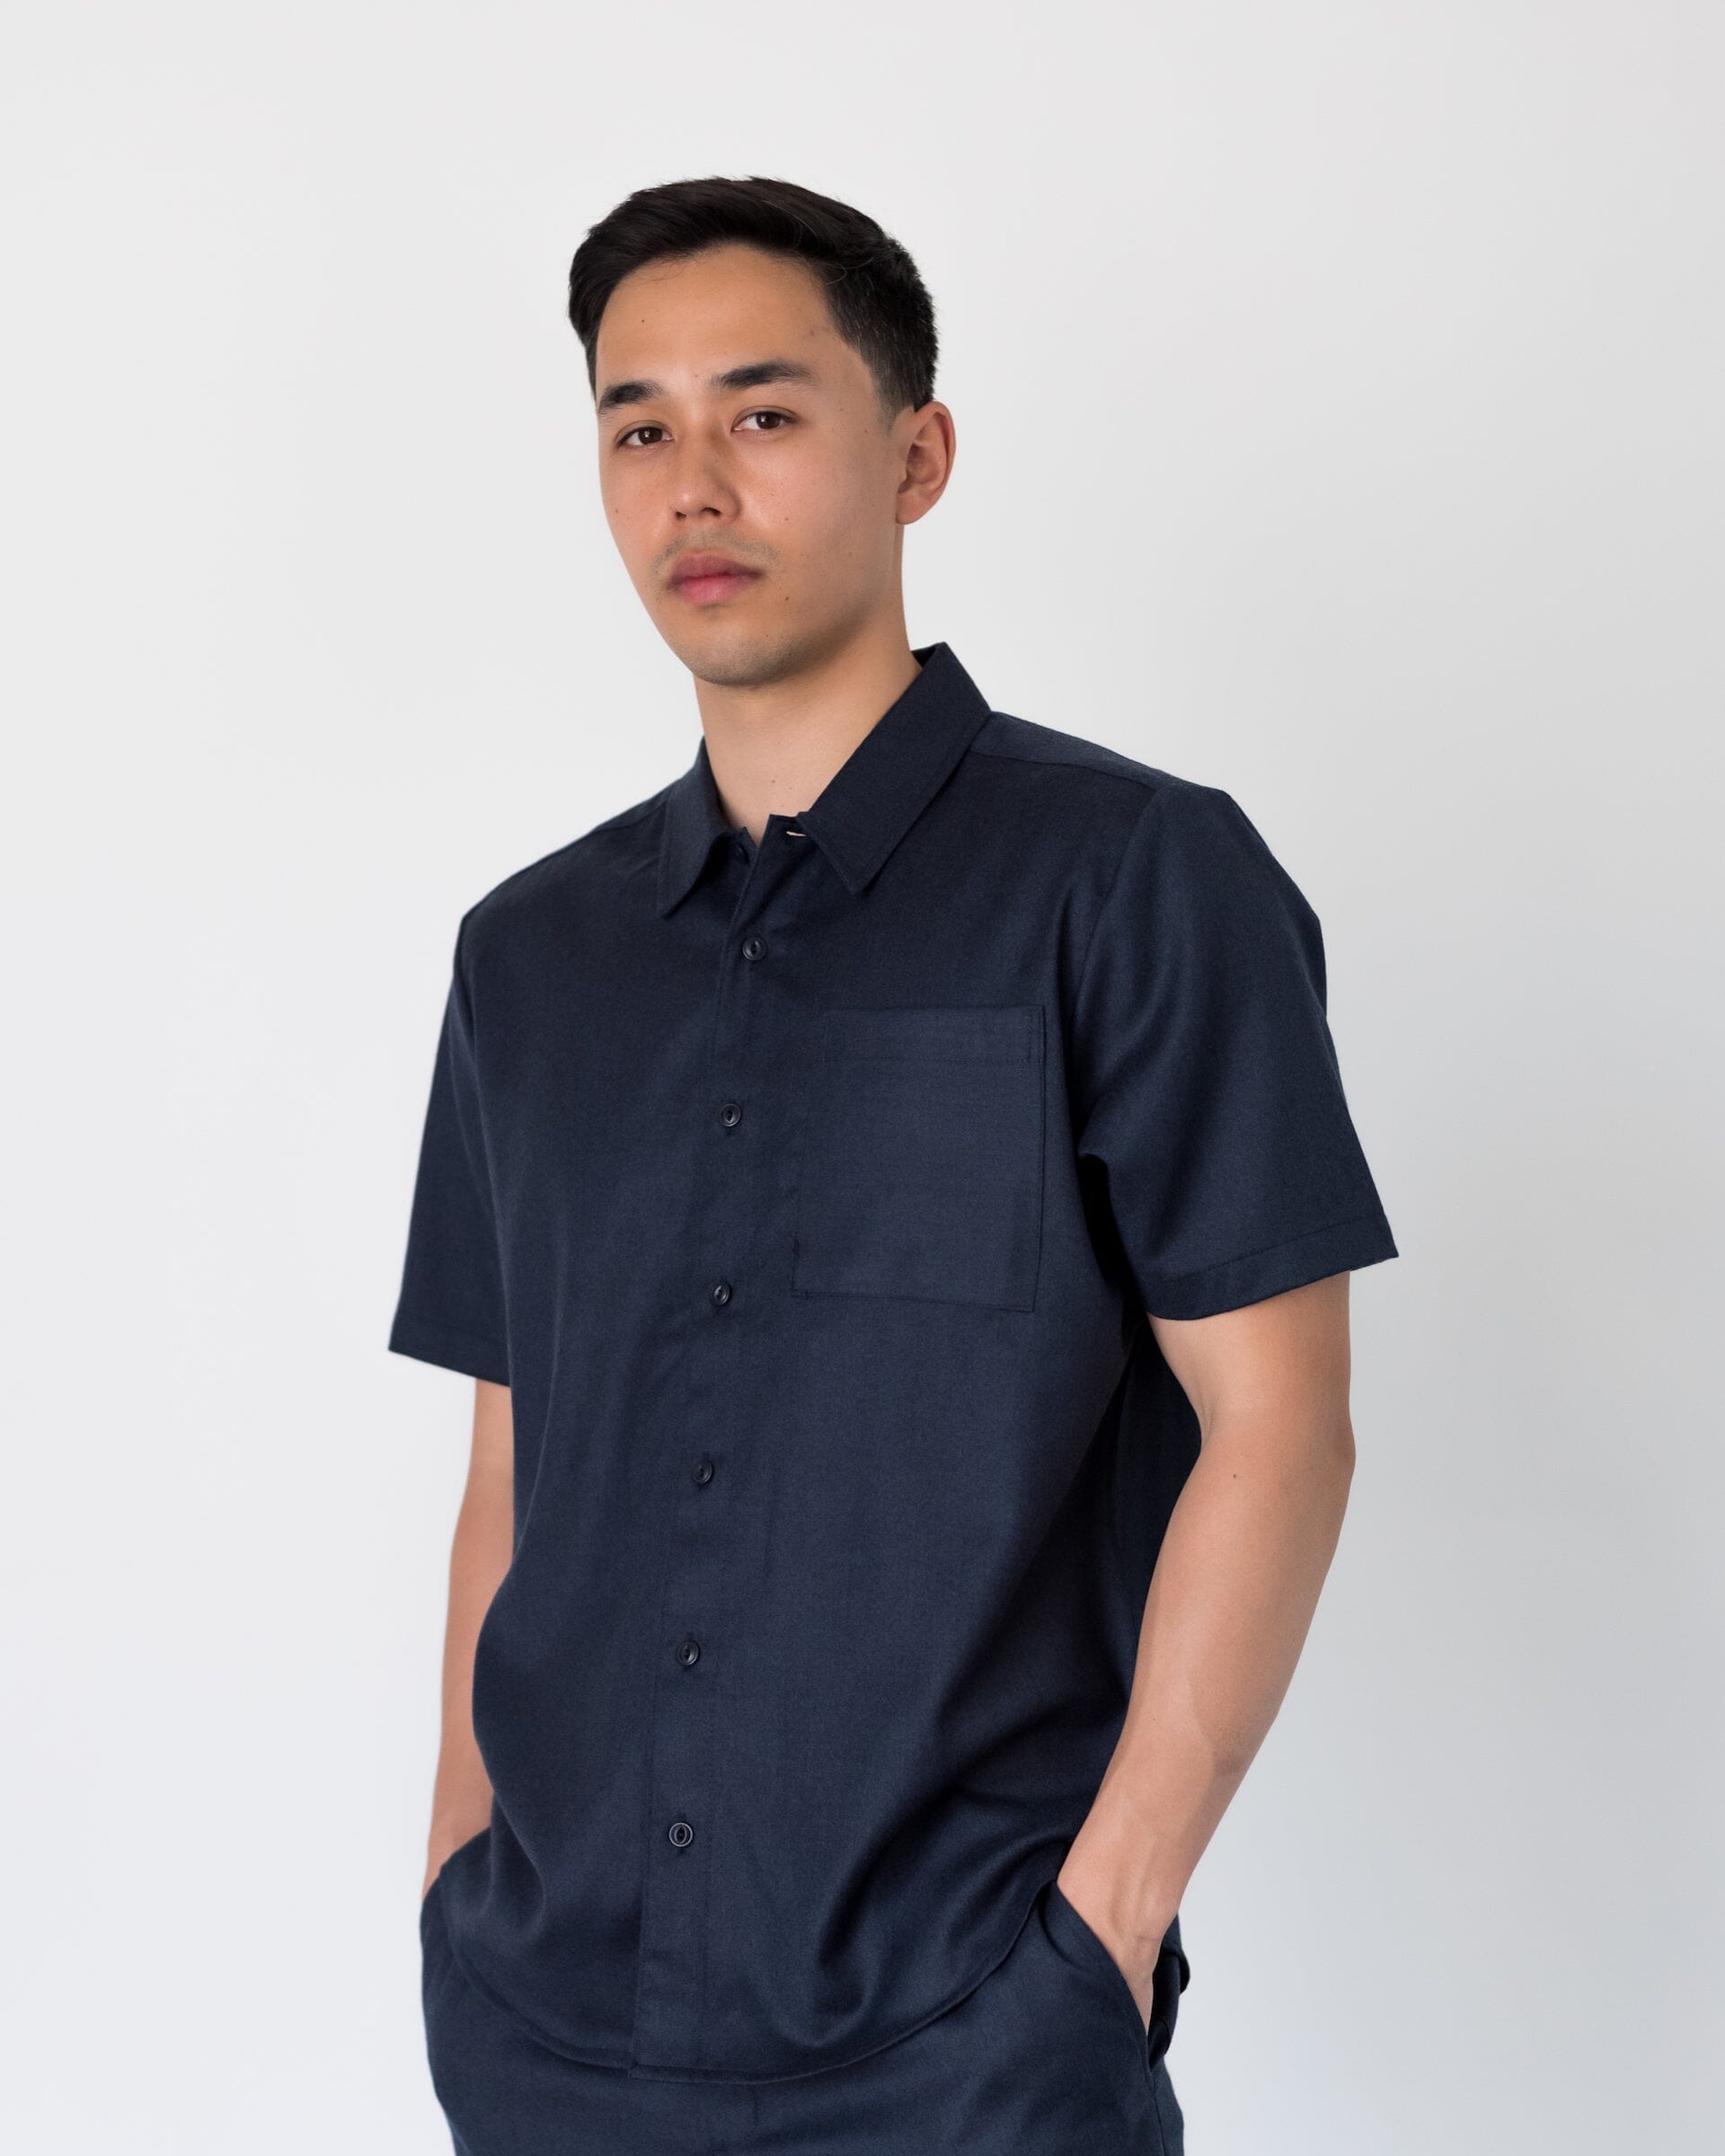 The Light Wool Short Sleeve Shirt in Heather Navy - Full Body 1 #color_heather navy